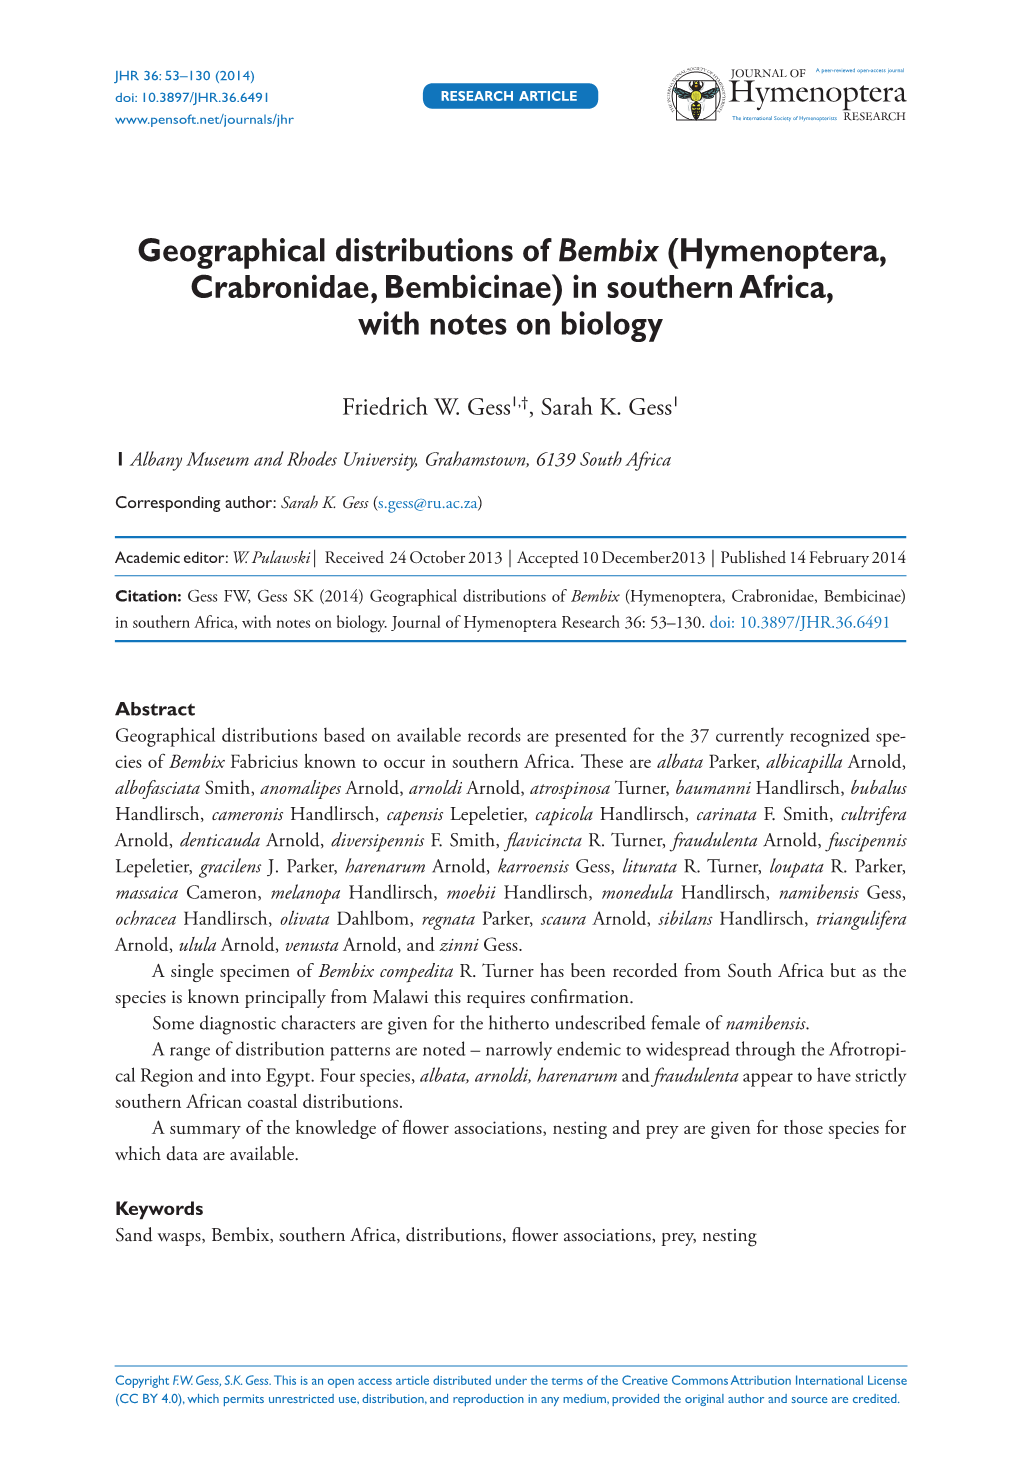 Geographical Distributions of Bembix (Hymenoptera, Crabronidae, Bembicinae) in Southern Africa, with Notes on Biology